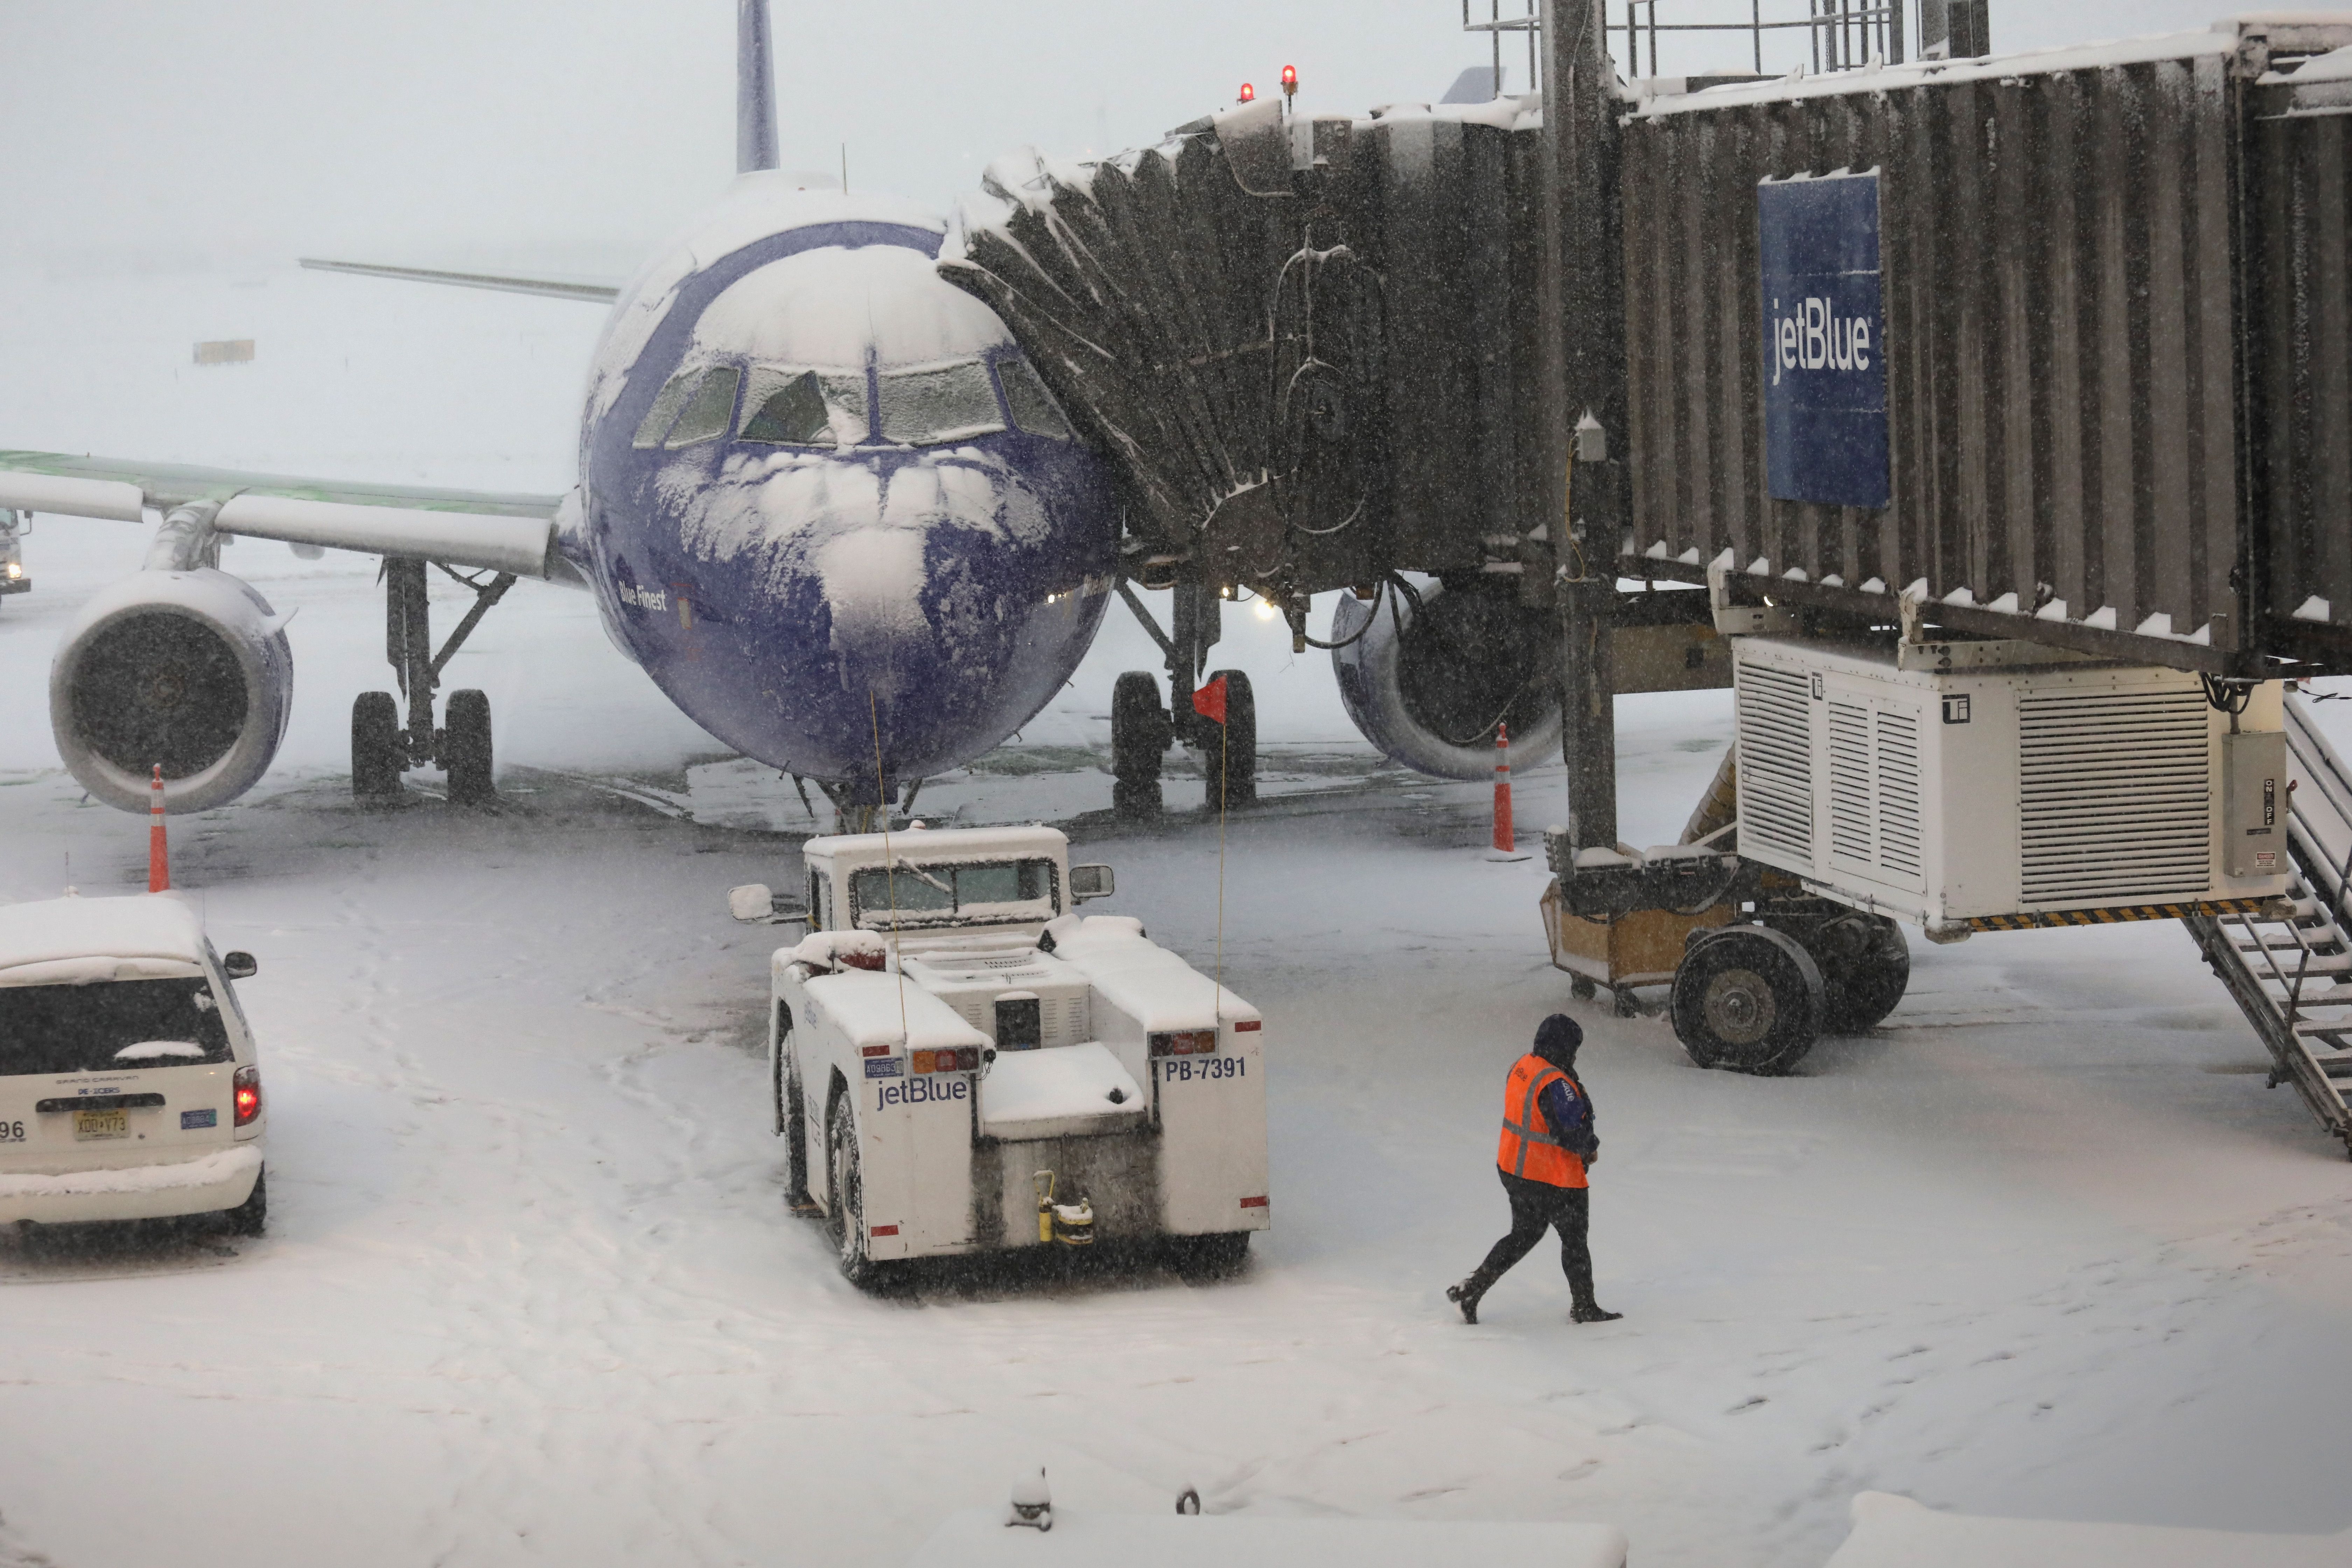  A ground crew member walks past a cancelled [JetBlue] flight due to a snow storm at the Newark Liberty International Airport on November 15, 2018 in Newark, New Jersey. The early season storm caused flight cancellations in much of the northeast